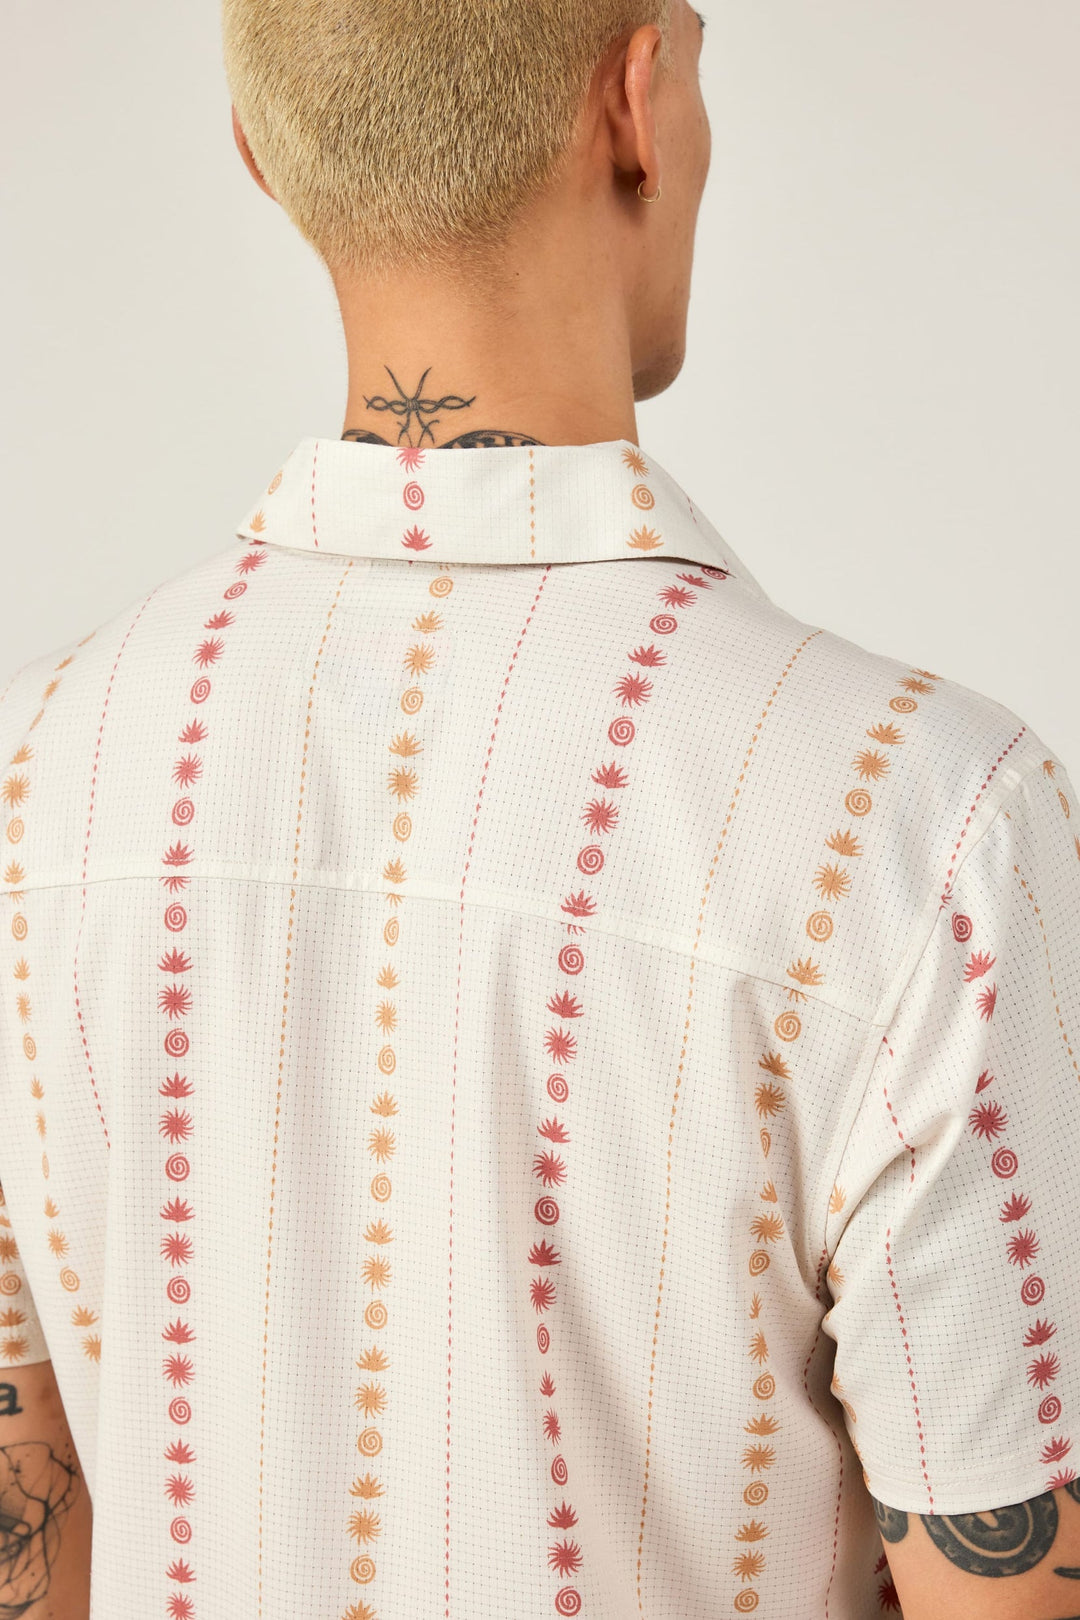 686 
Nomad Perforated Button Down Shirt - Southwest Limestone - Sun Diego Boardshop